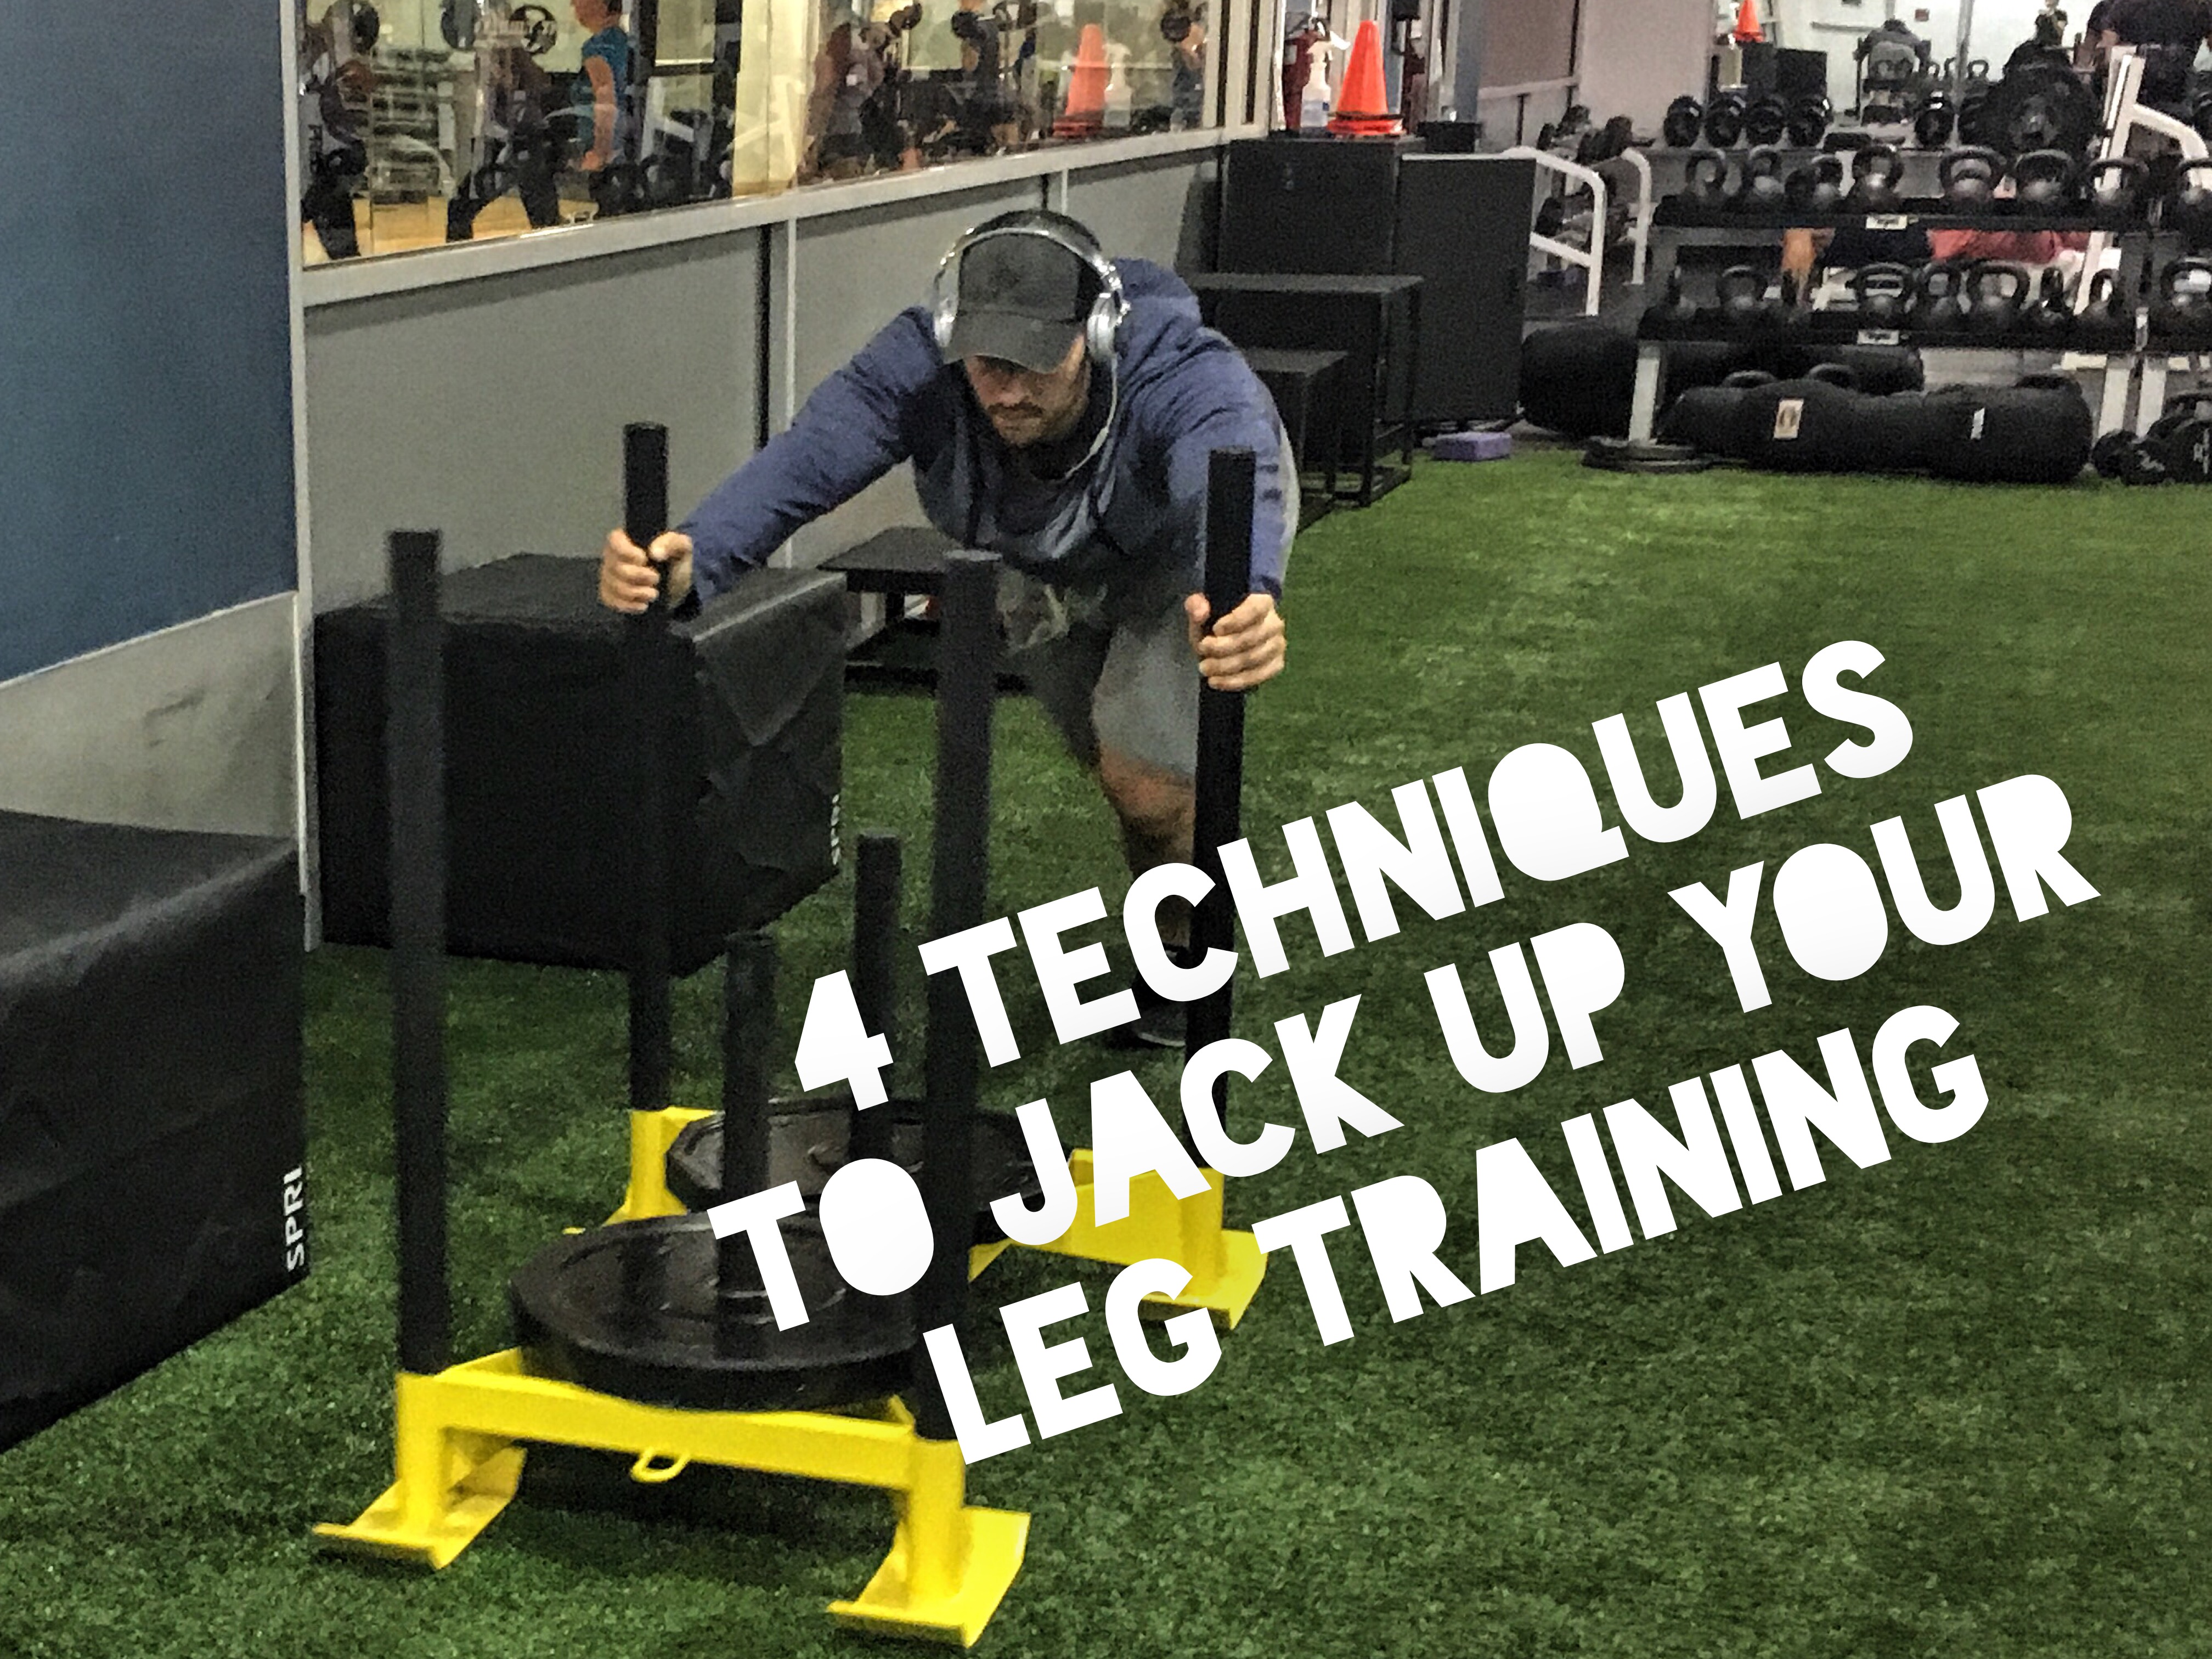 HOW TO JACK UP YOUR LEG TRAINING